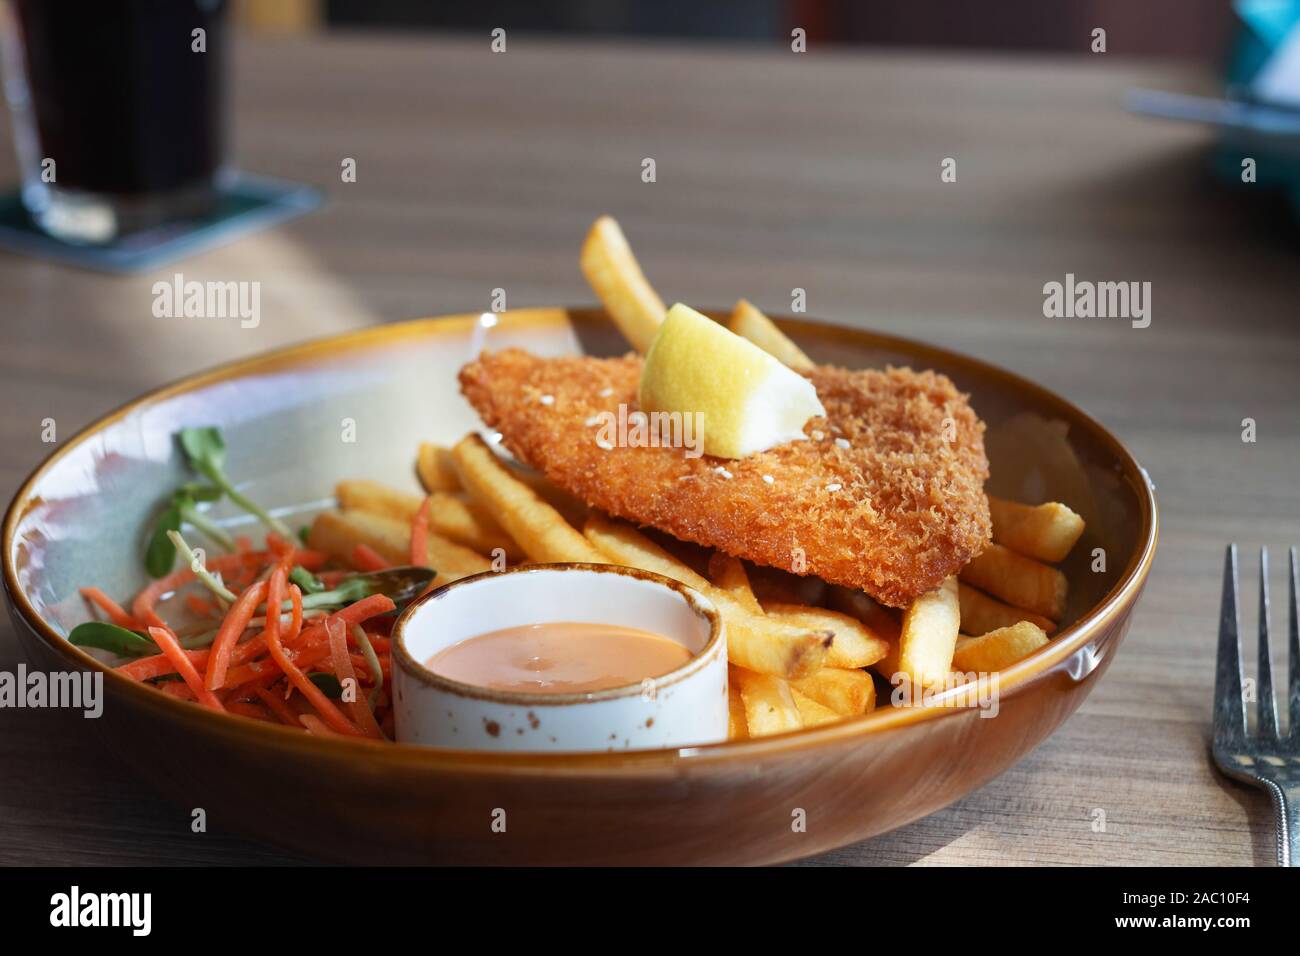 fried fish filet with french fries and veggies on plate in restaurant Stock Photo